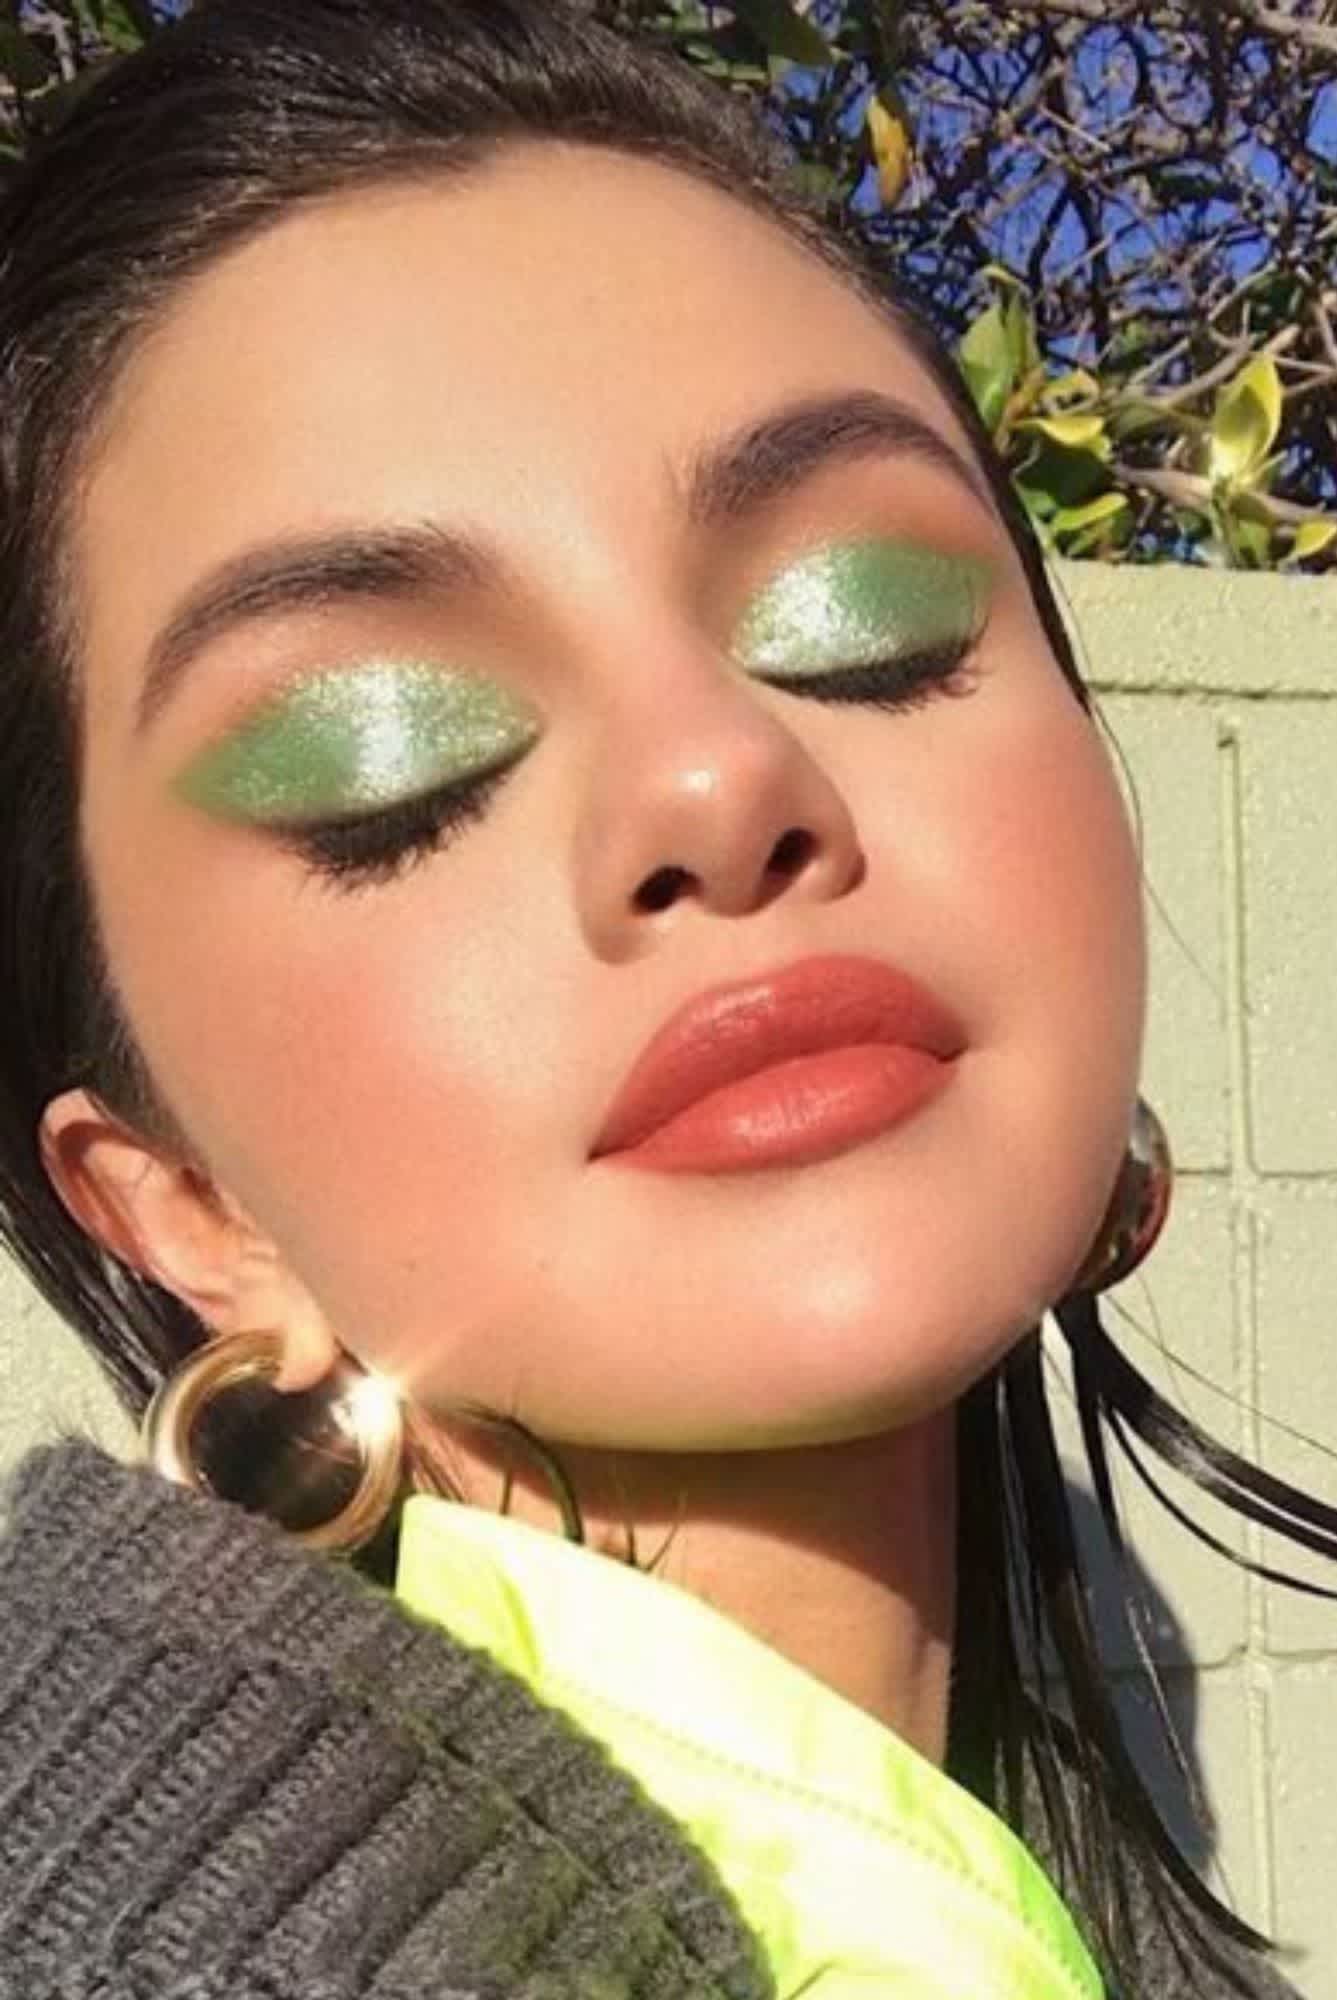 Selena Gomez with a pastel wash of green eye makeup applied by Hung Van Go